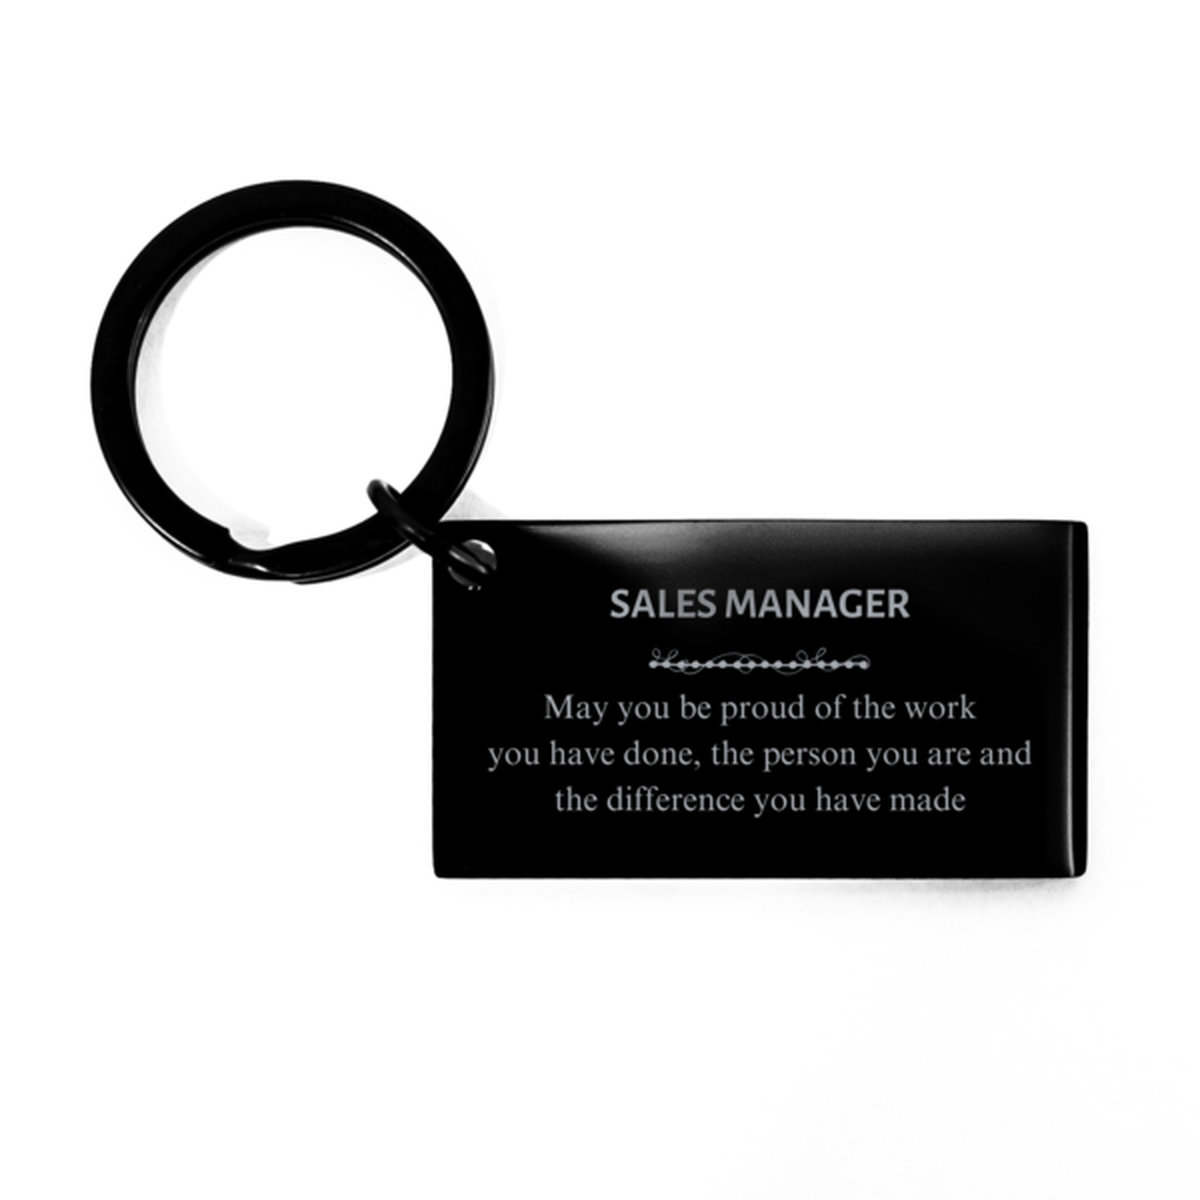 Tour Guide May you be proud of the work you have done, Retirement Sales Manager Keychain for Colleague Appreciation Gifts Amazing for Sales Manager